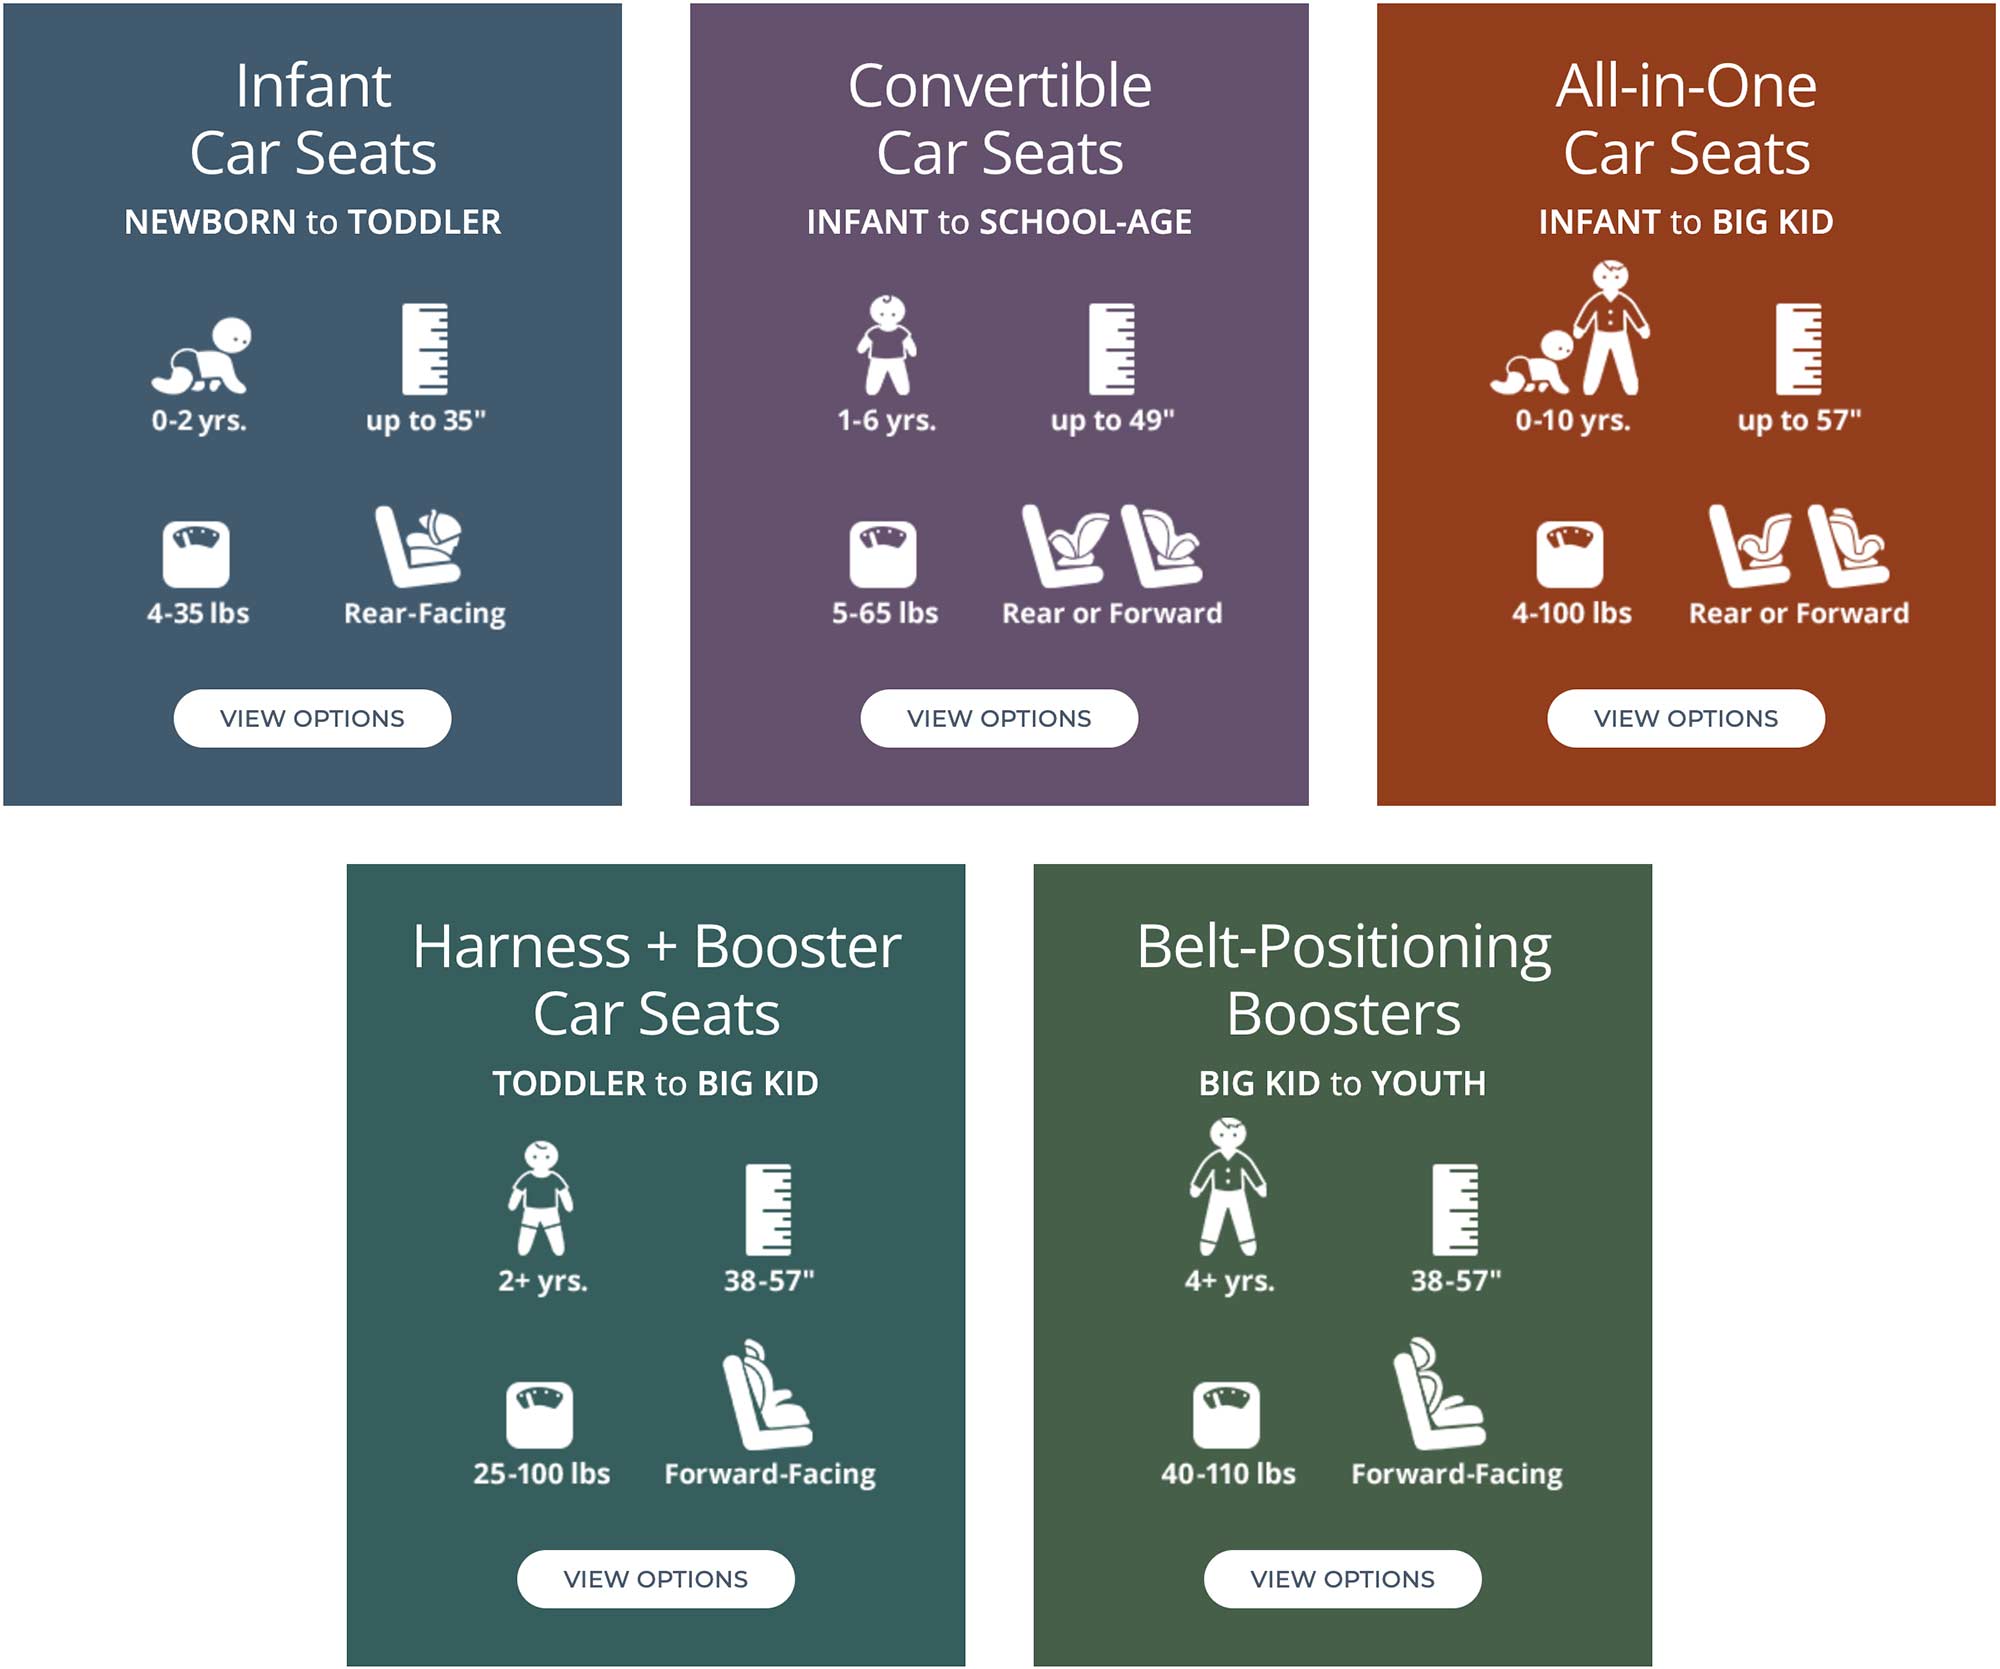 https://www.chiccousa.com/on/demandware.static/-/Sites-Chicco-Library/default/dw1faa942c/images/baby-talk/chicco-choosing-car-seat-guide.jpg